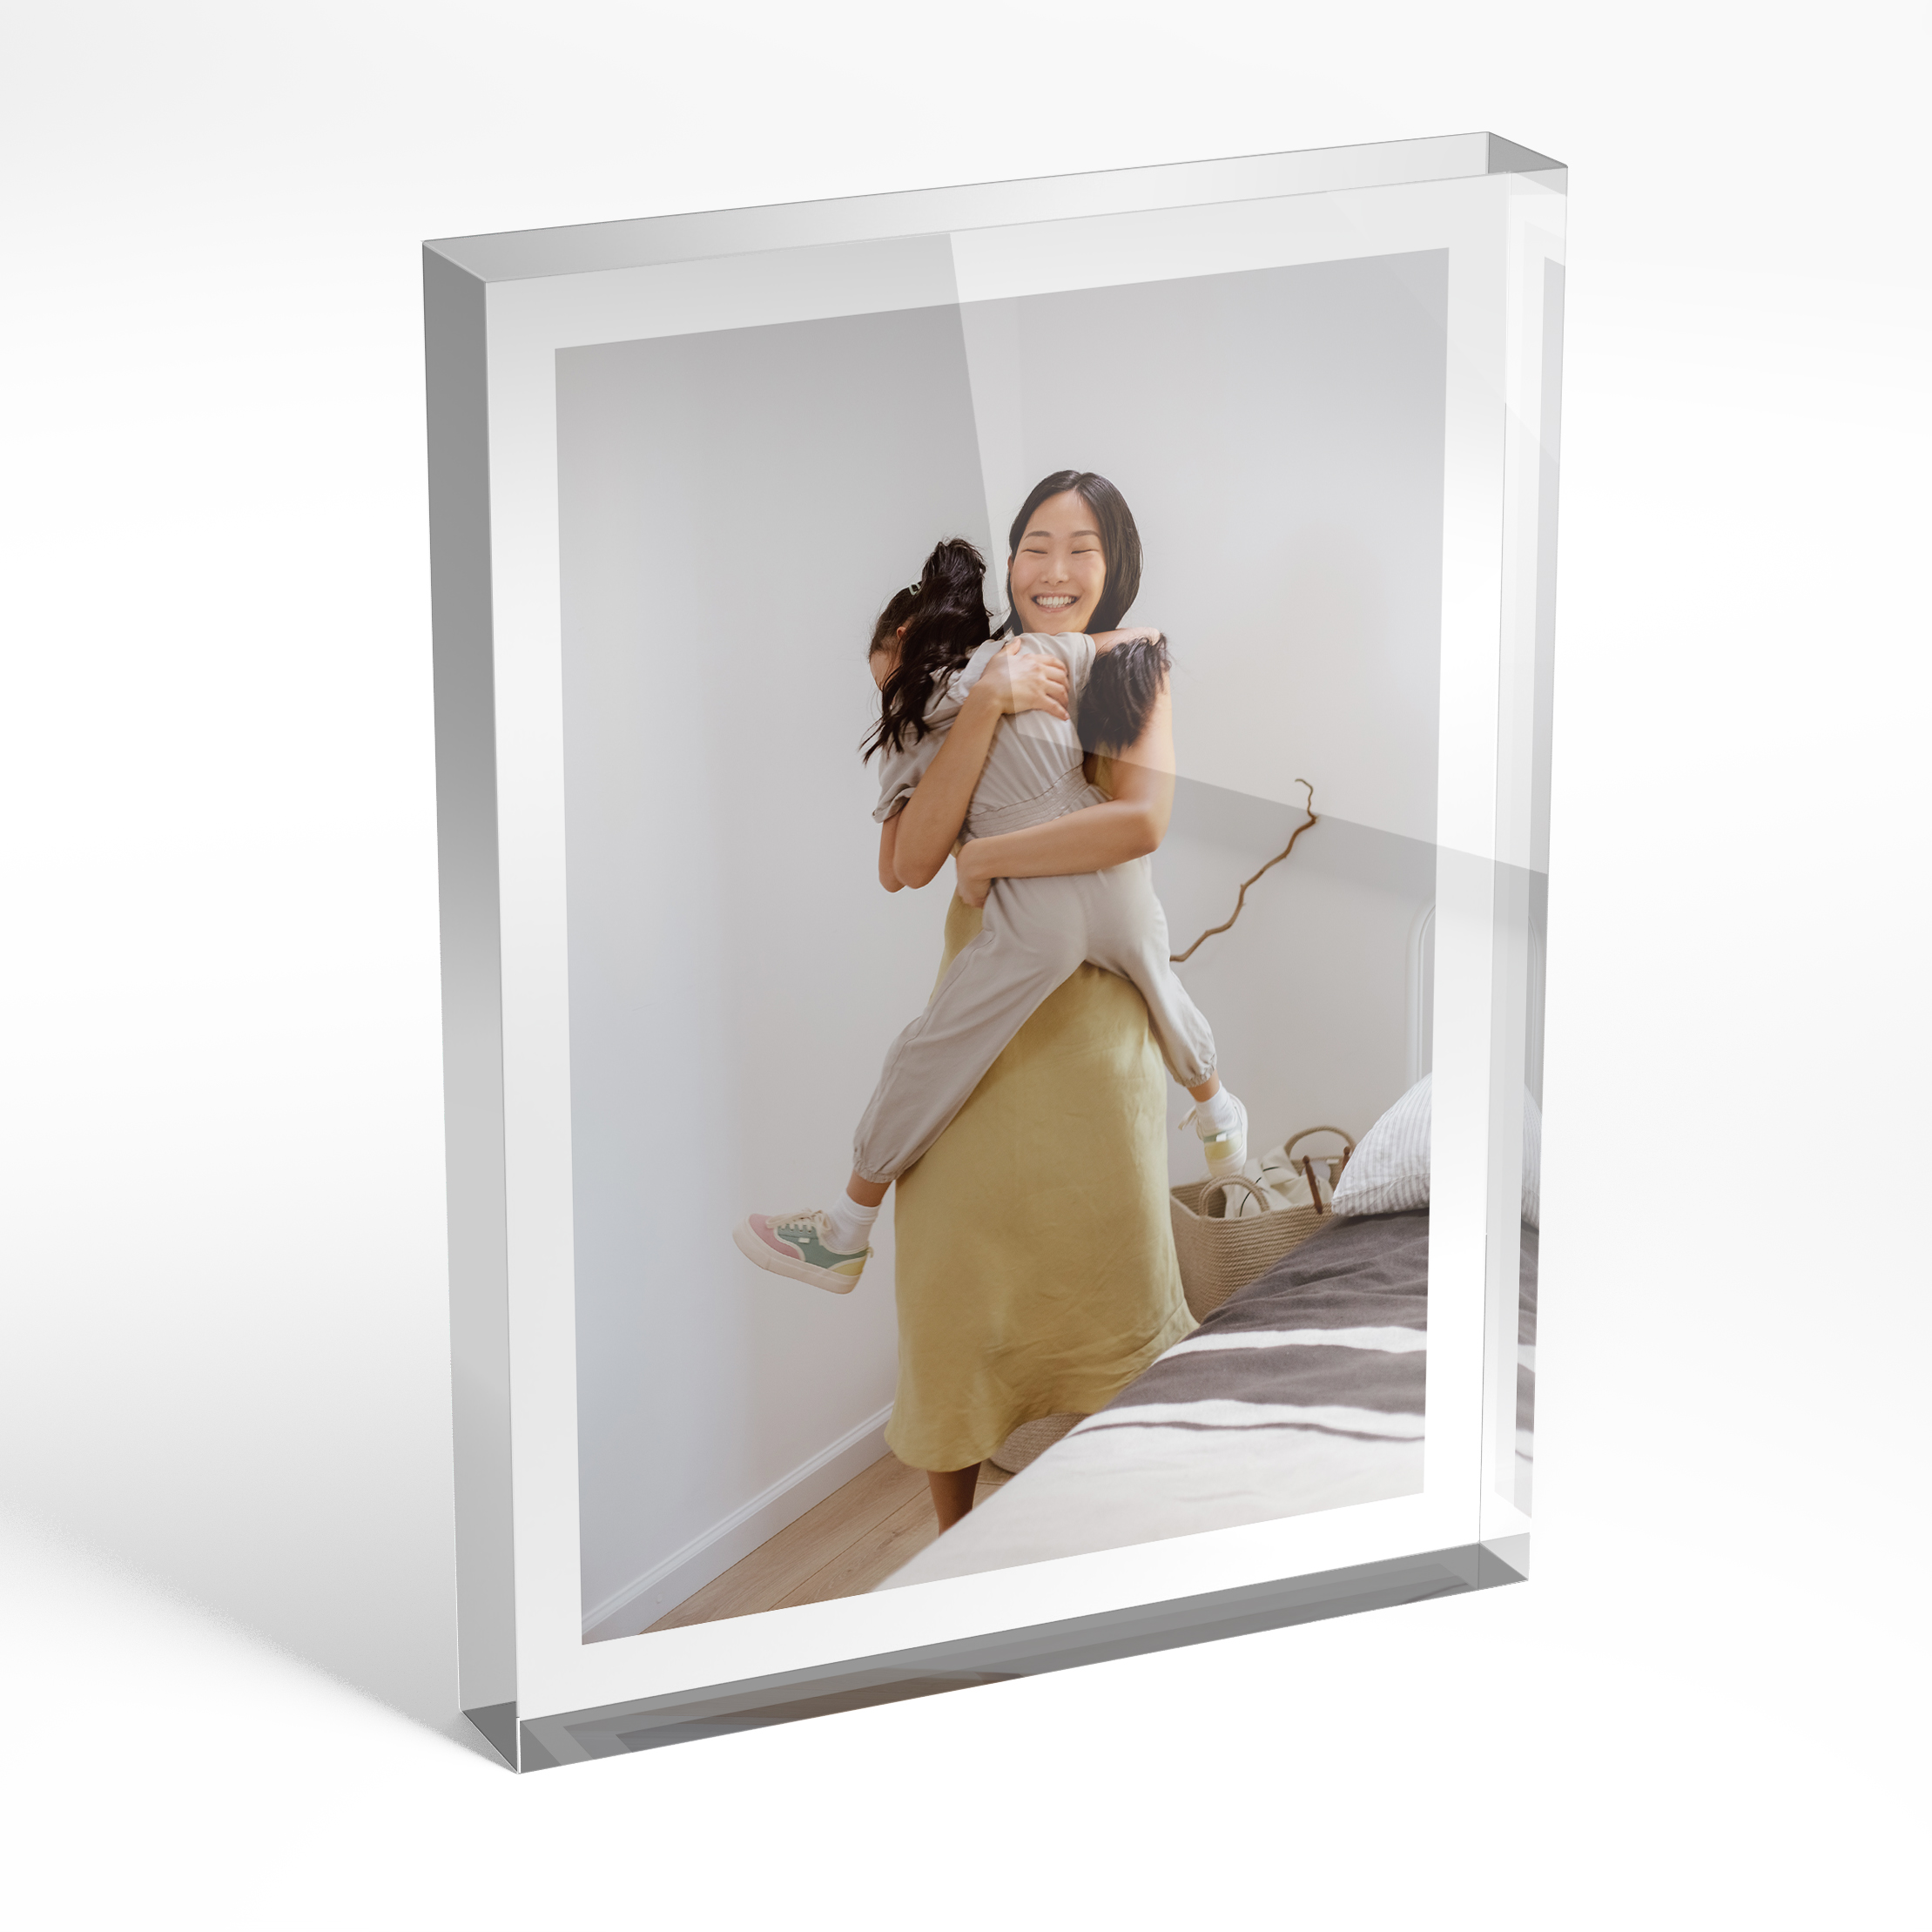 An angled side view of a portrait layout Perspex Photo Blocks with space for 1 photo. Thiis design is named "Medium White Frame". 